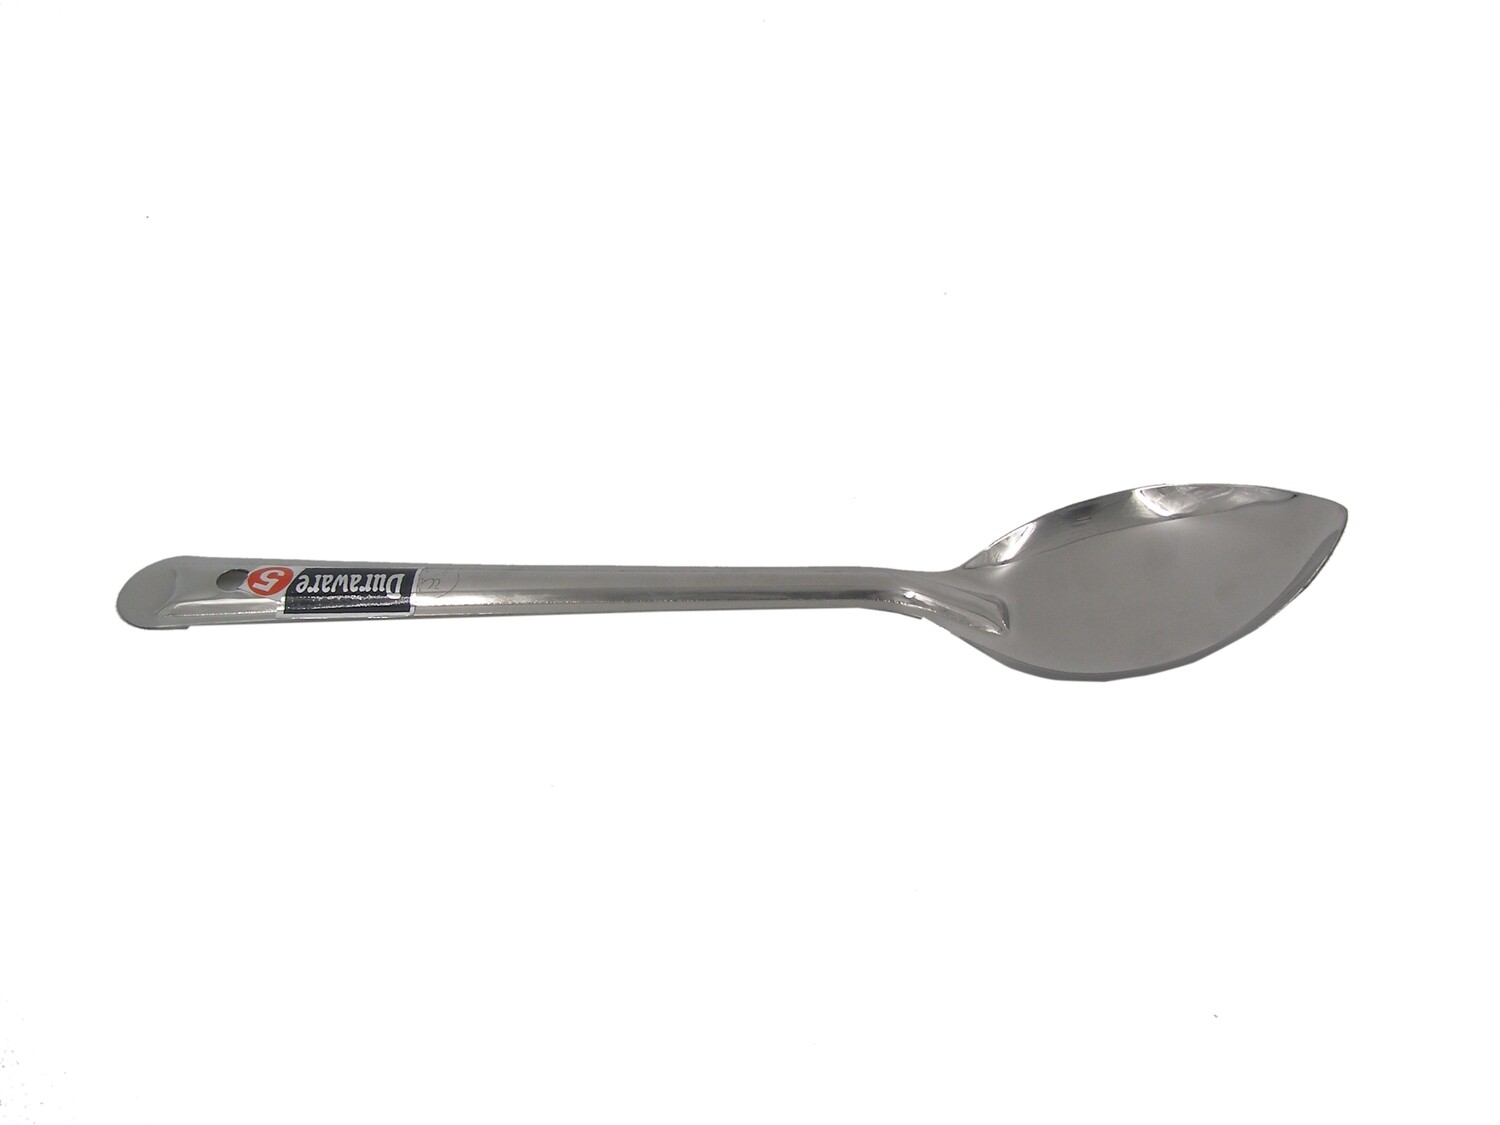 WELCOME/DURAWARE SS ROUND SERVING SPOON NO.4